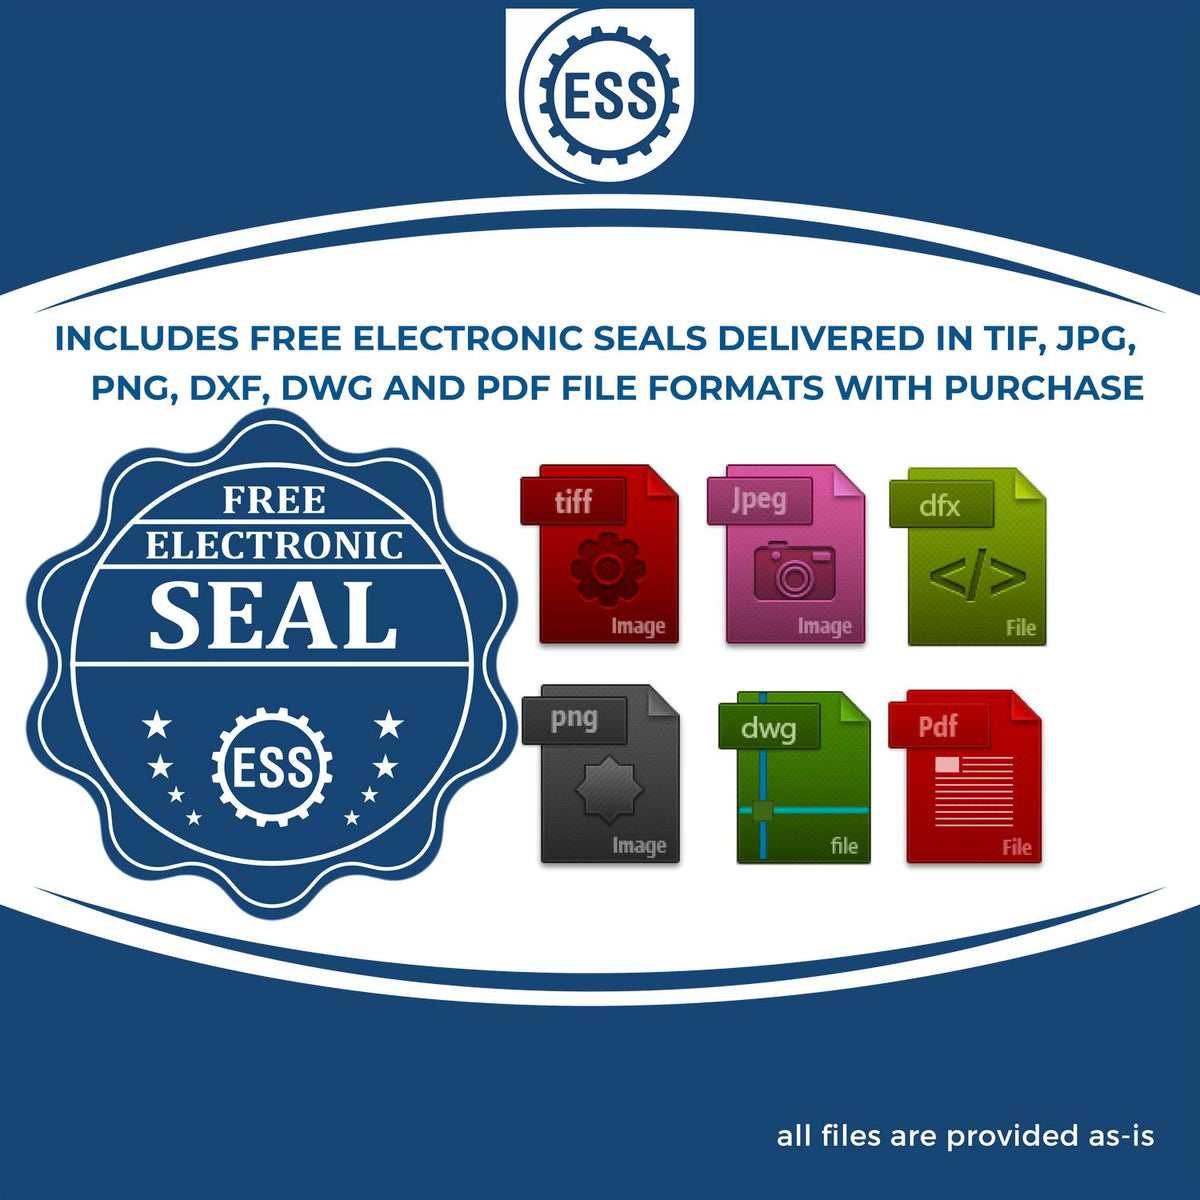 An infographic for the free electronic seal for the Idaho Professional Geologist Seal Stamp illustrating the different file type icons such as DXF, DWG, TIF, JPG and PNG.